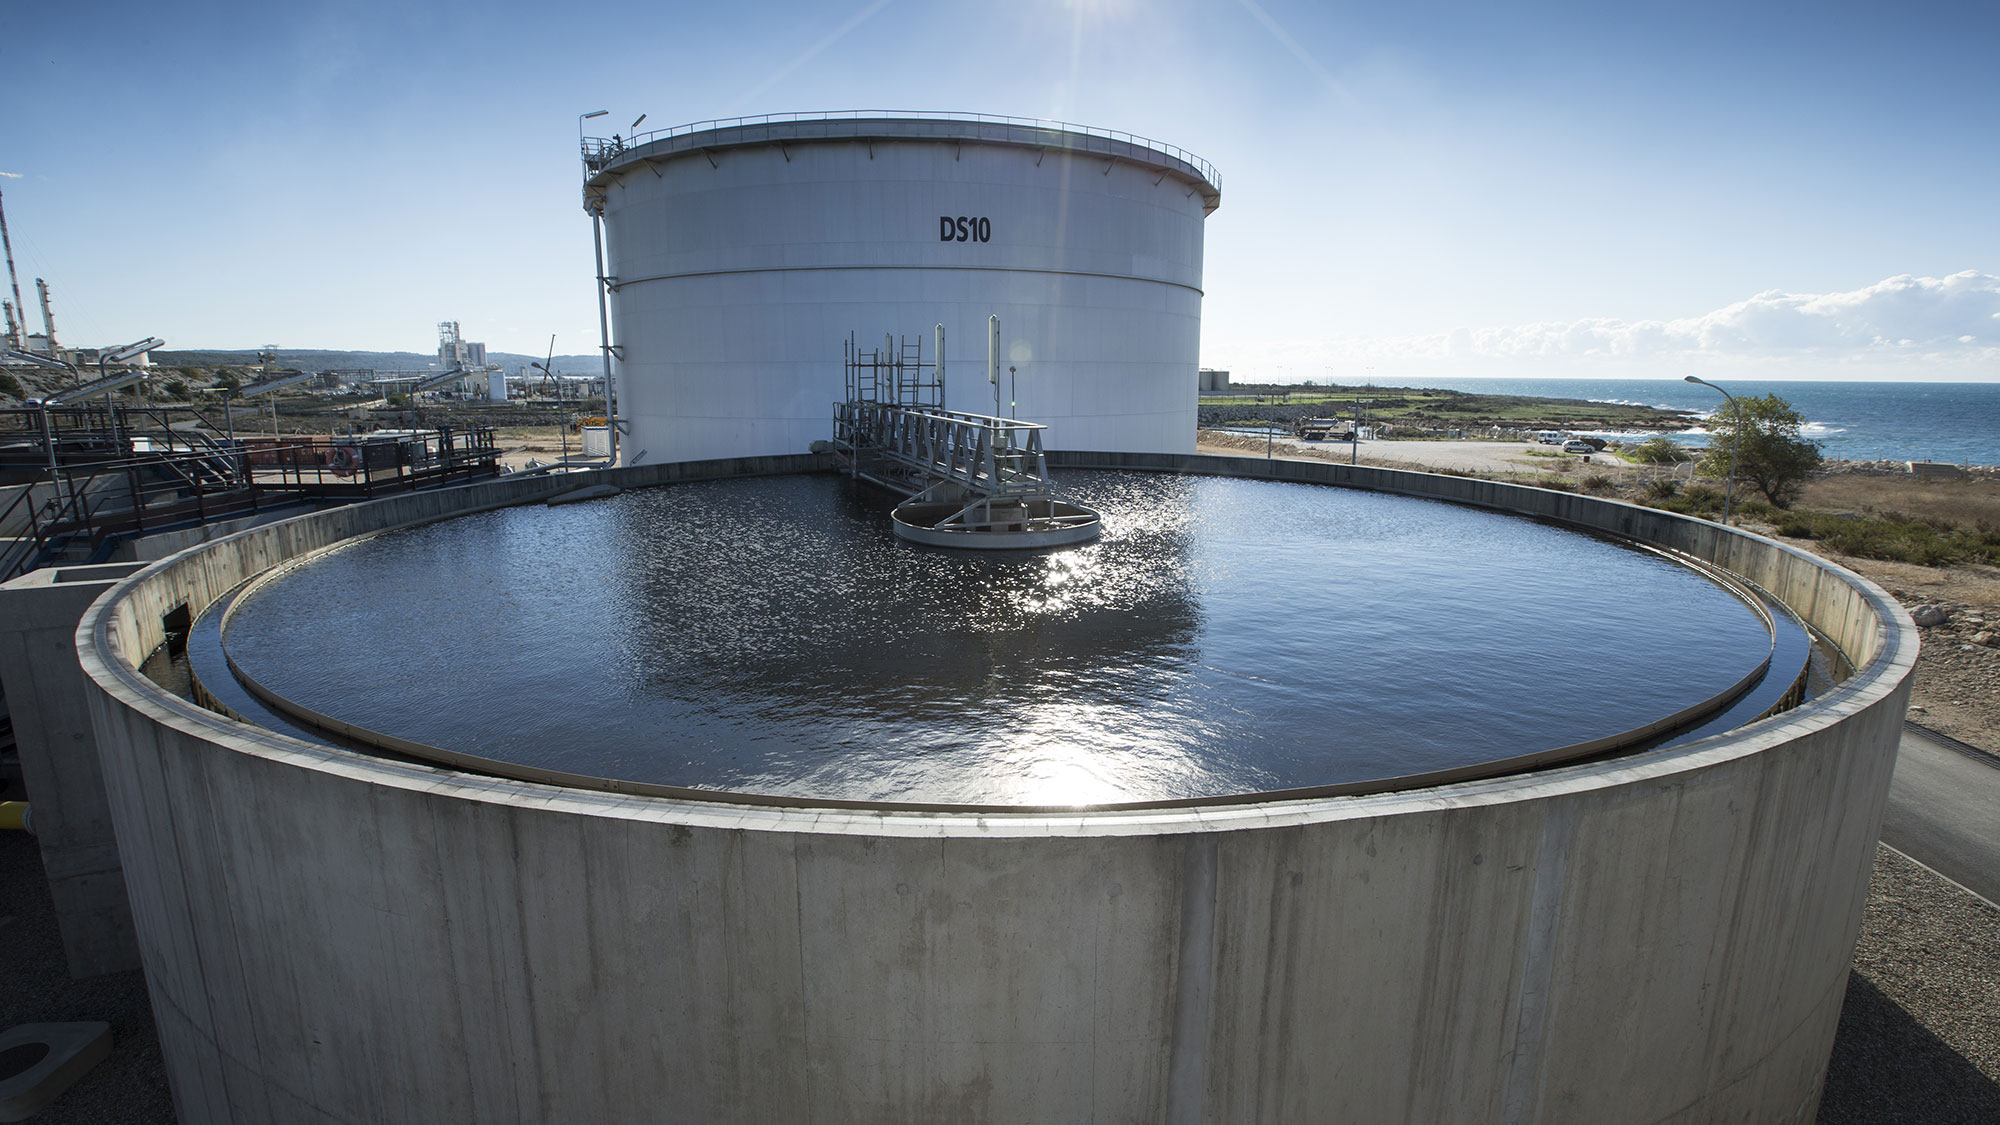 Limit the impact of wastewater treatment plants on their environment